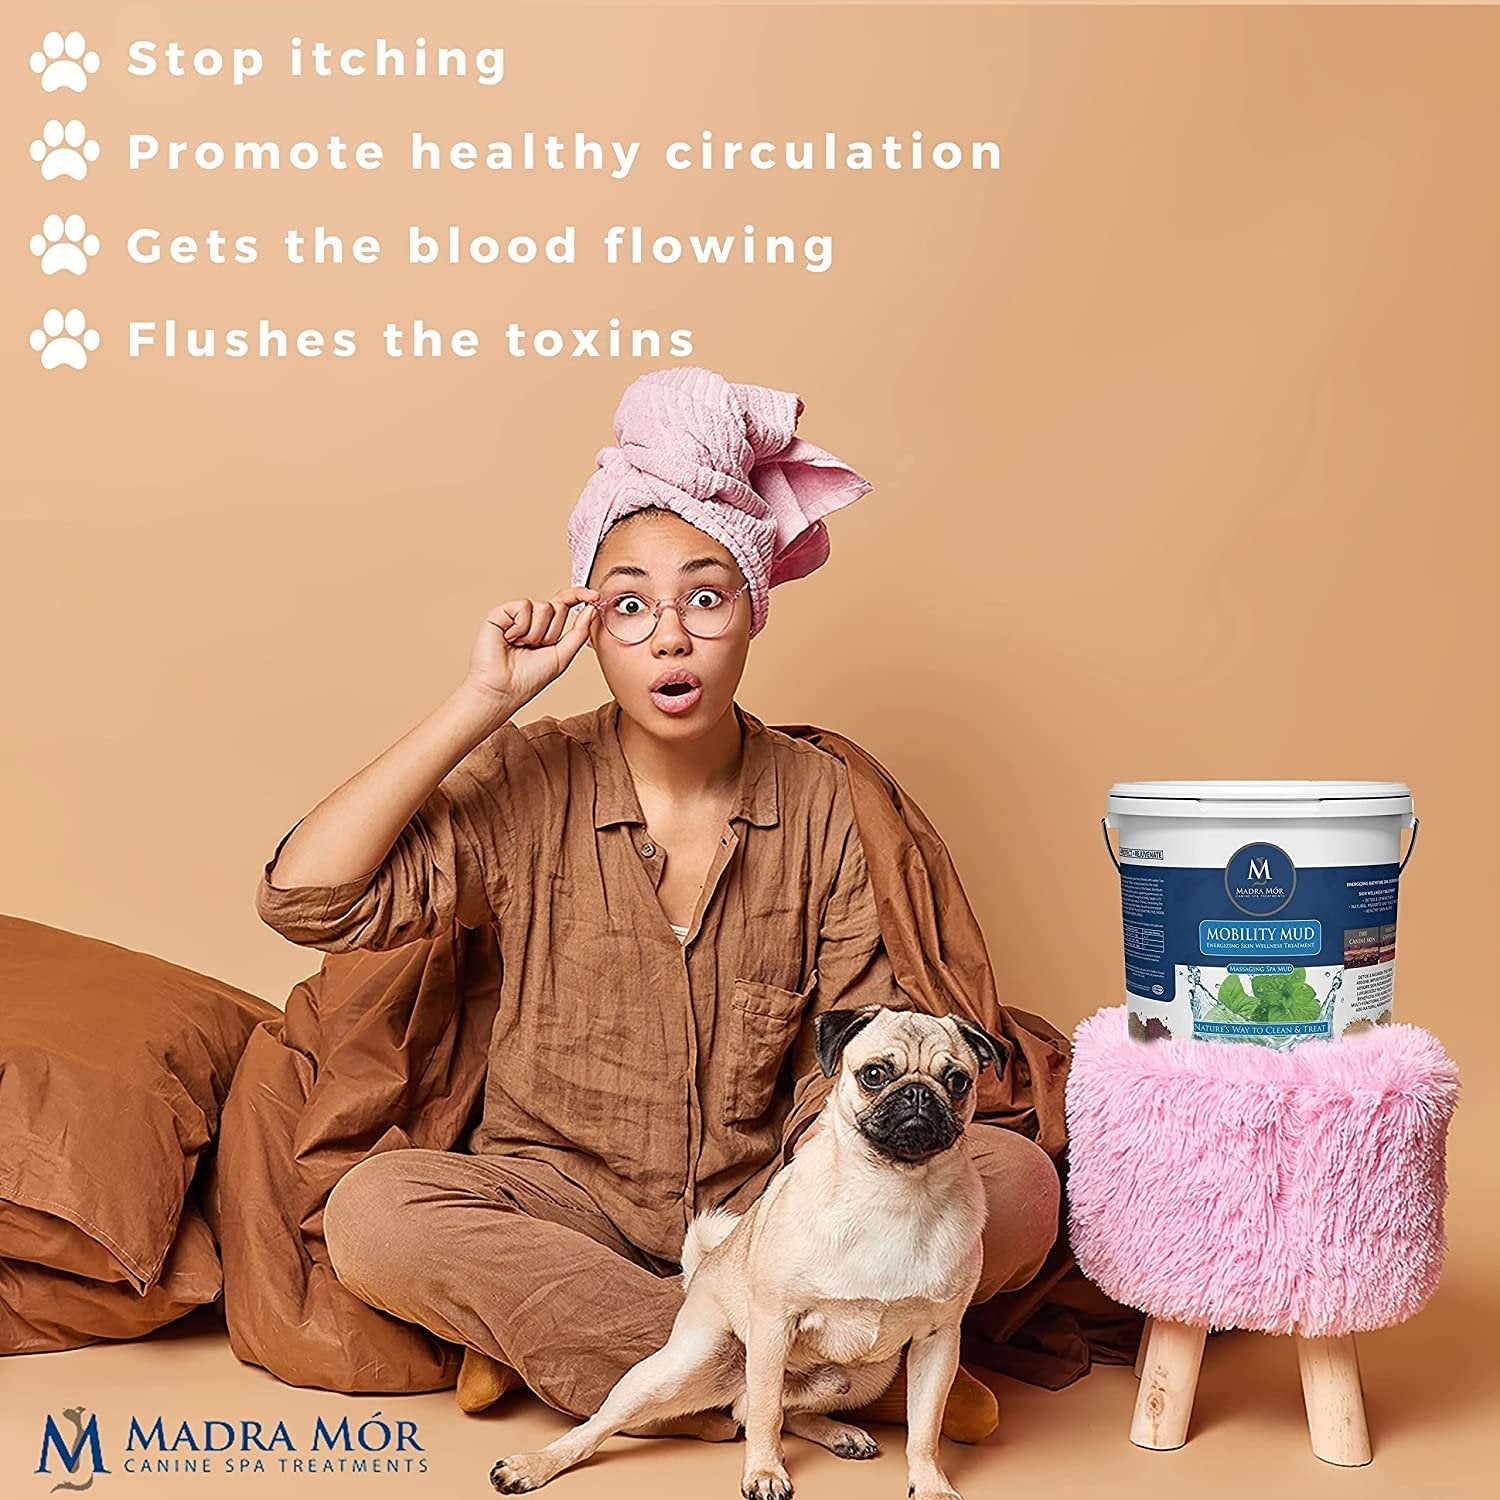 Madra Mor Massaging SPA Mud - Luxurious Dog Skin Wellness Treatment - Cleanse - Protect - Rejuvenate - Mobility Mud - 1 Pail (7.5lb) - with Multi-Purpose Key Chain